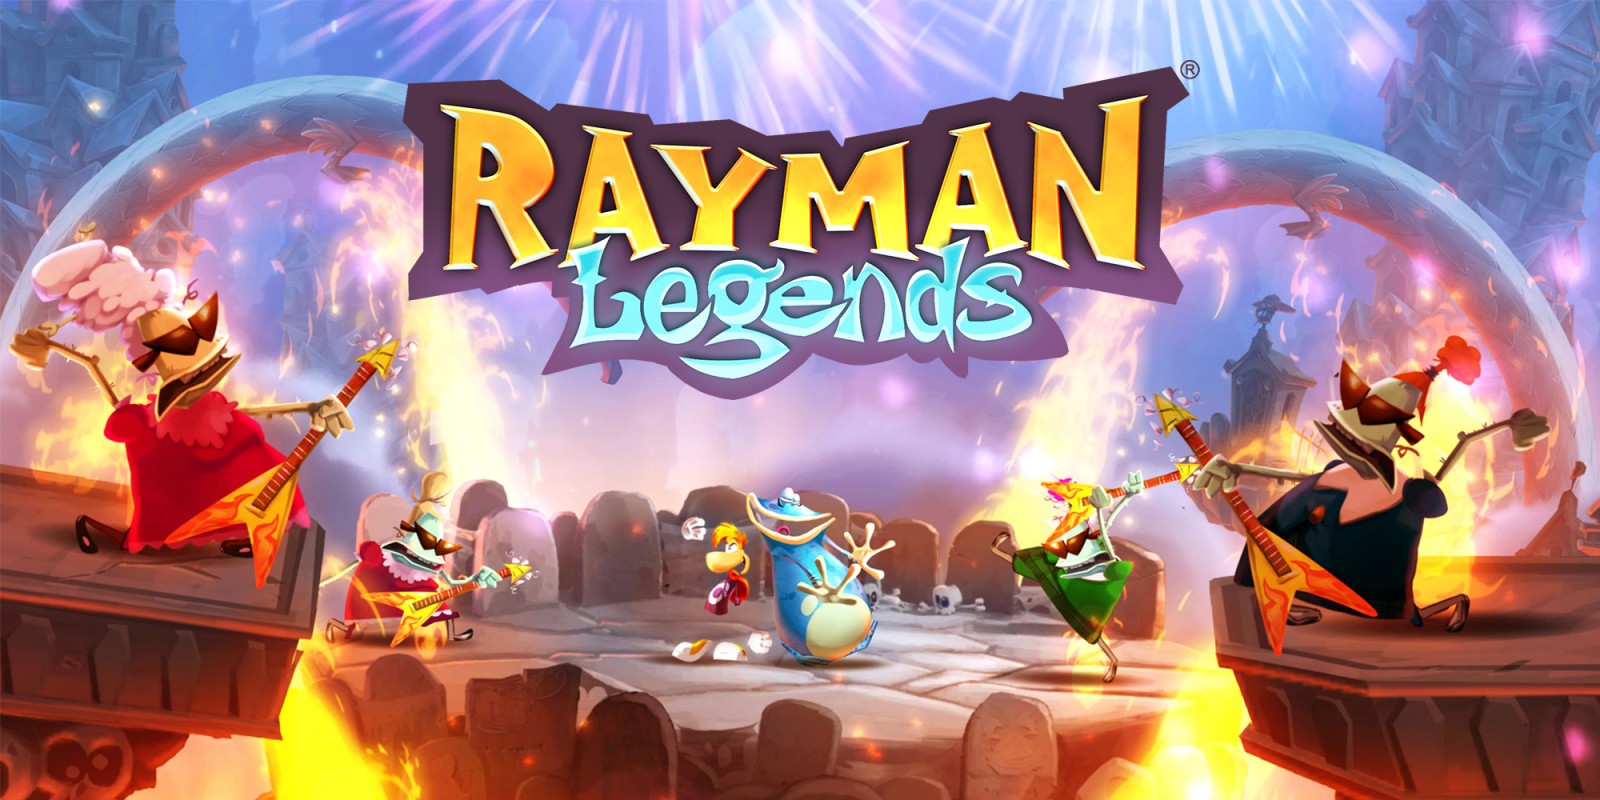 Rayman Legends video game